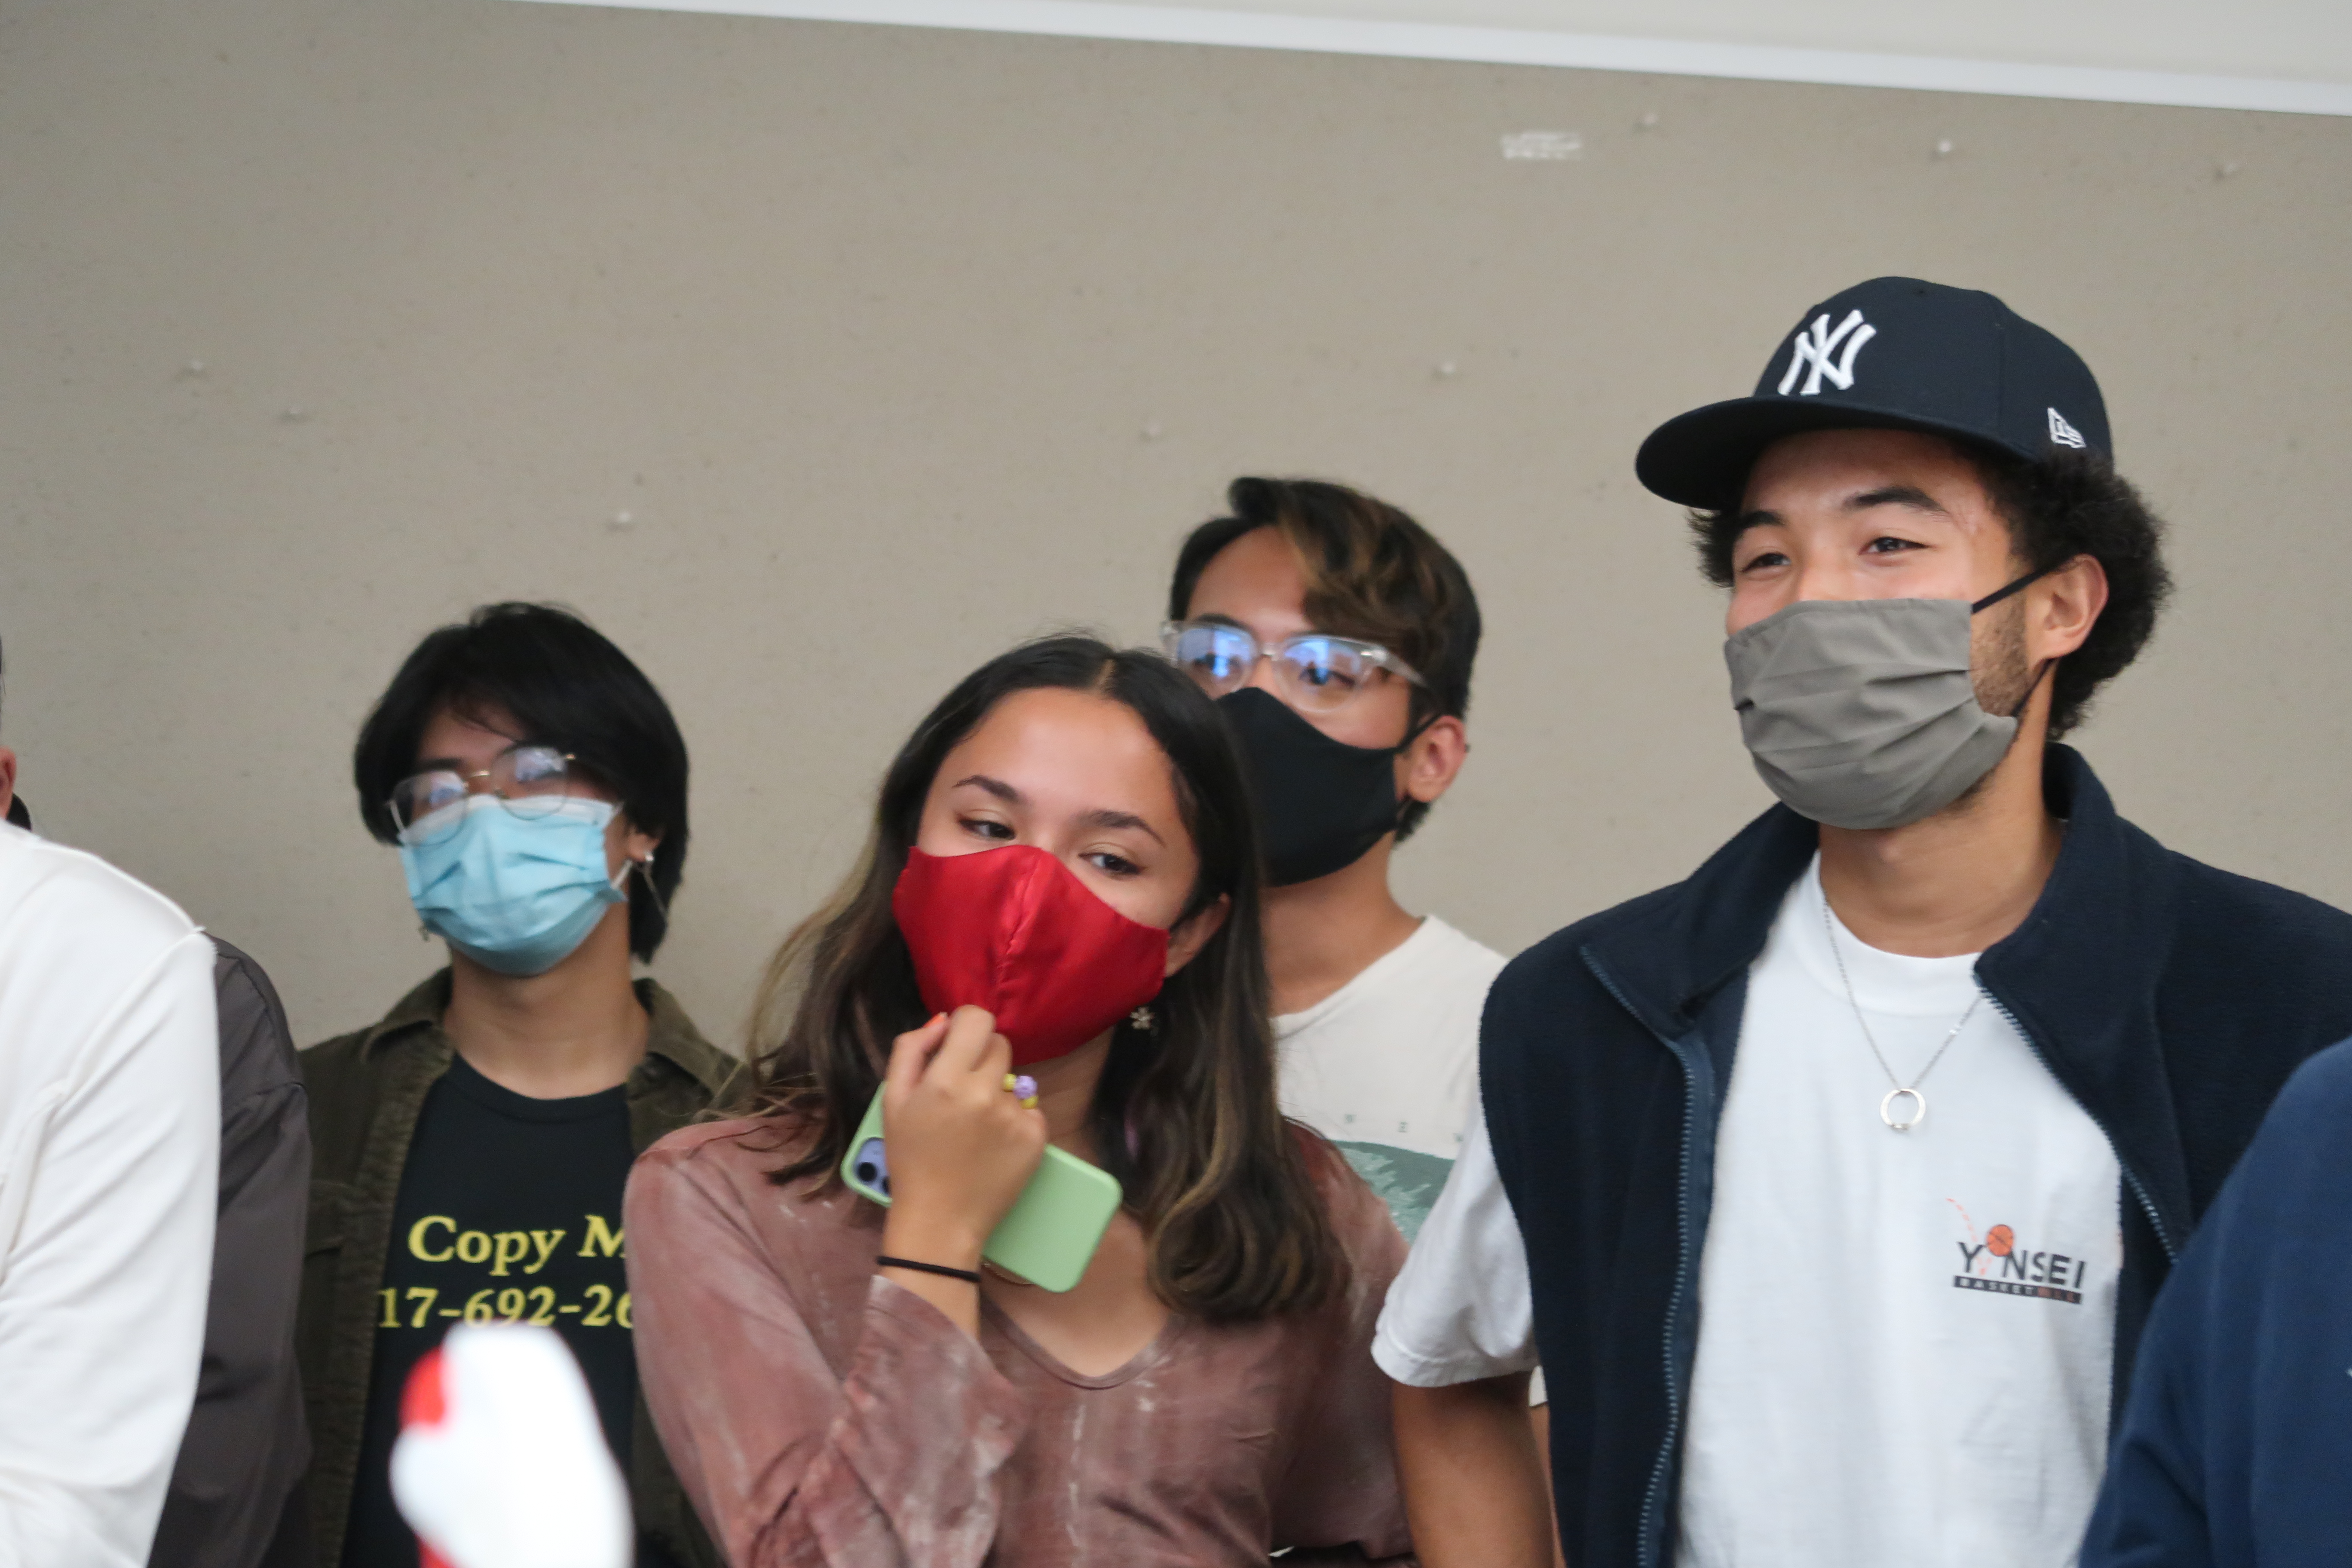 Students with varying face mask colors of red, blue, black, and gray smiling and looking at camera.